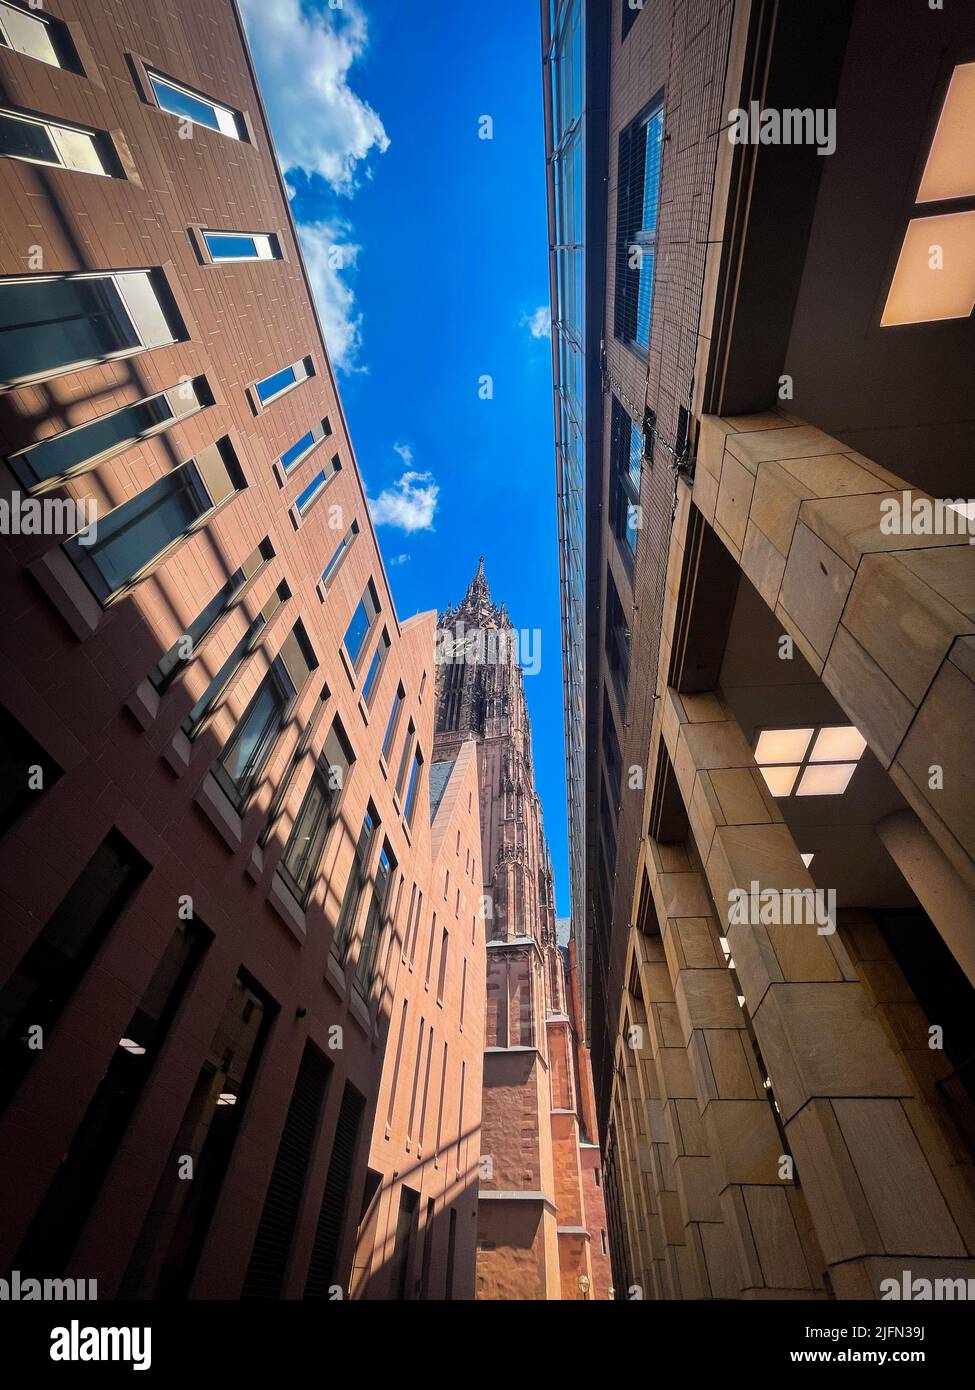 The historic Frankfurt Cathedral in Frankfurt am Main against a clear blue sky Stock Photo